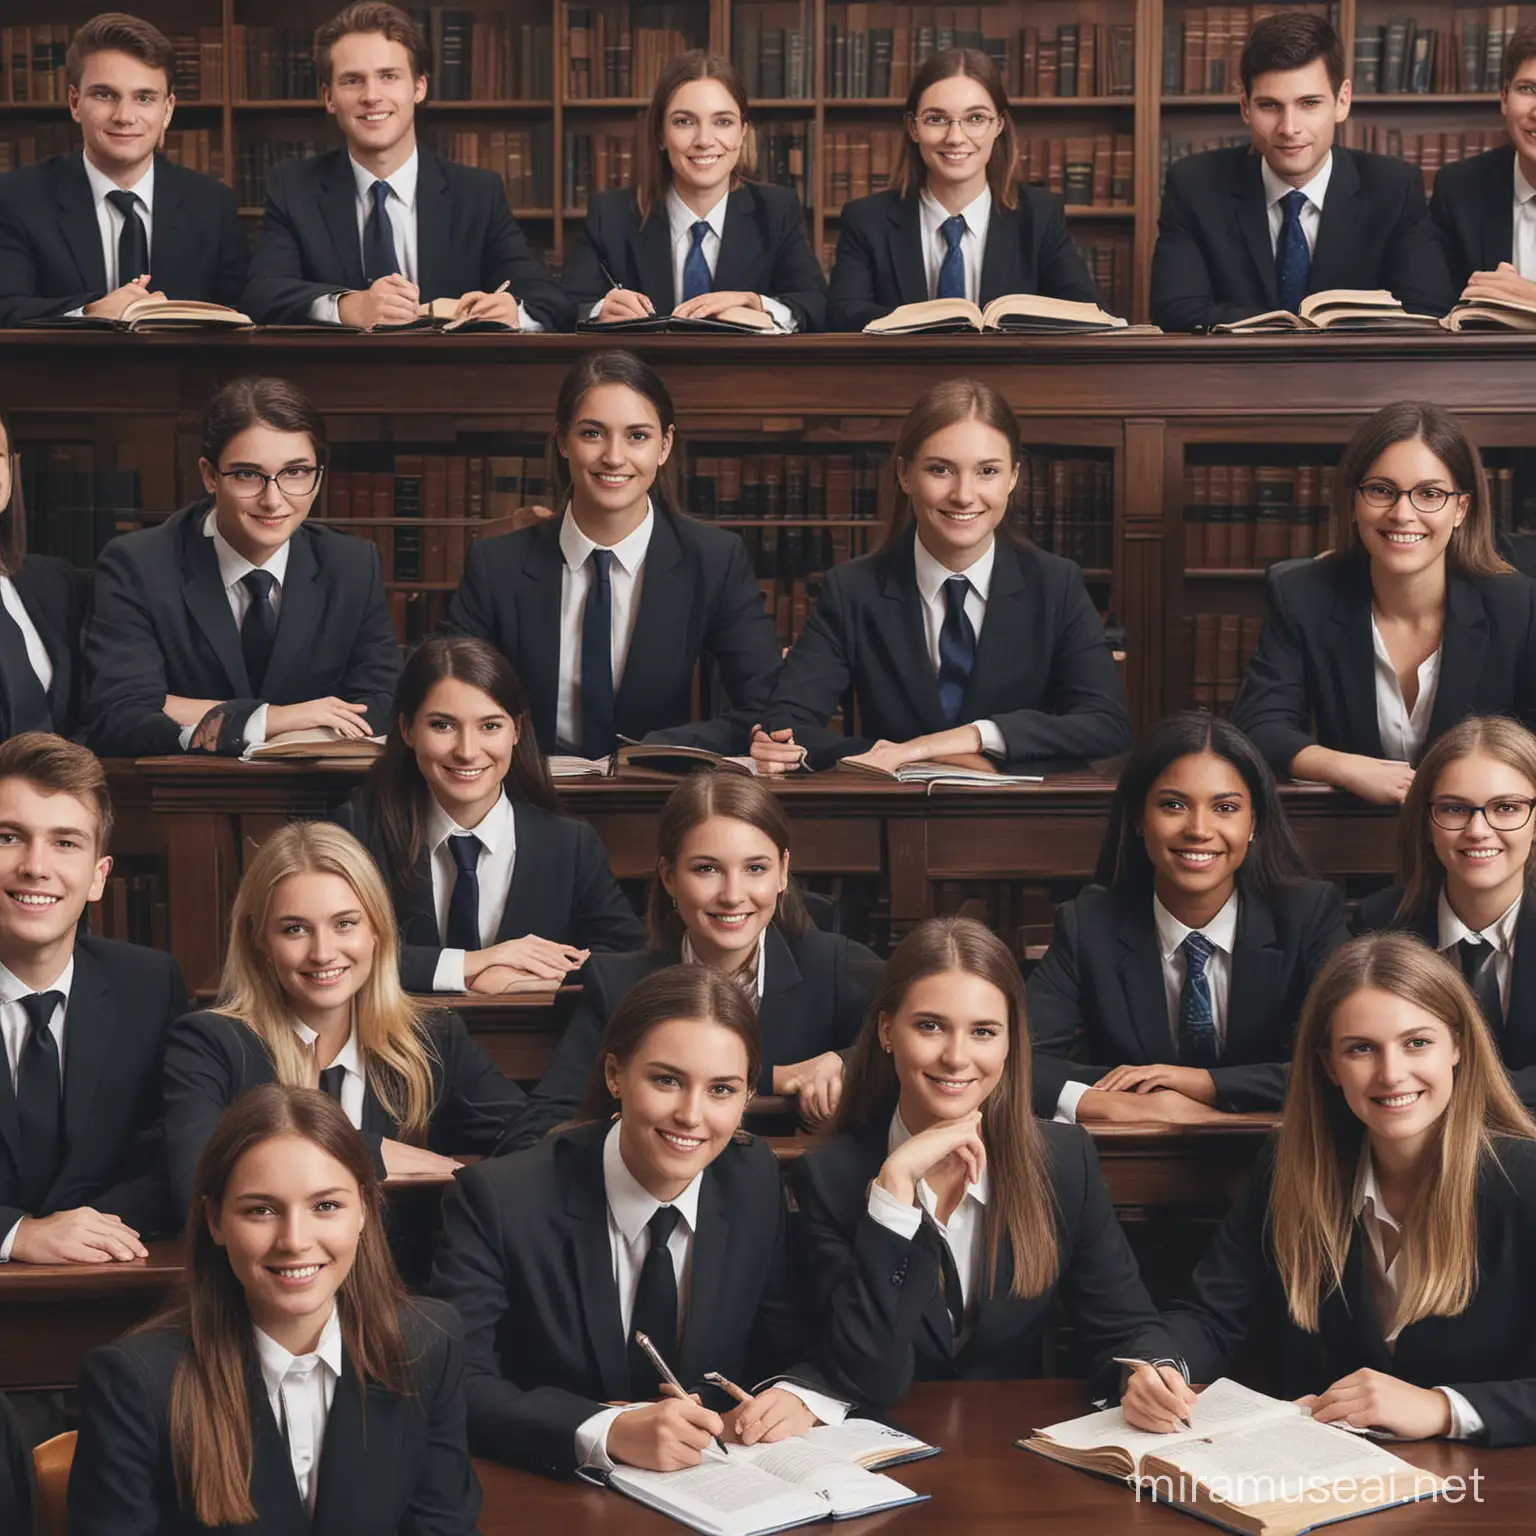 Create an image of law students learning how to be great lawyers